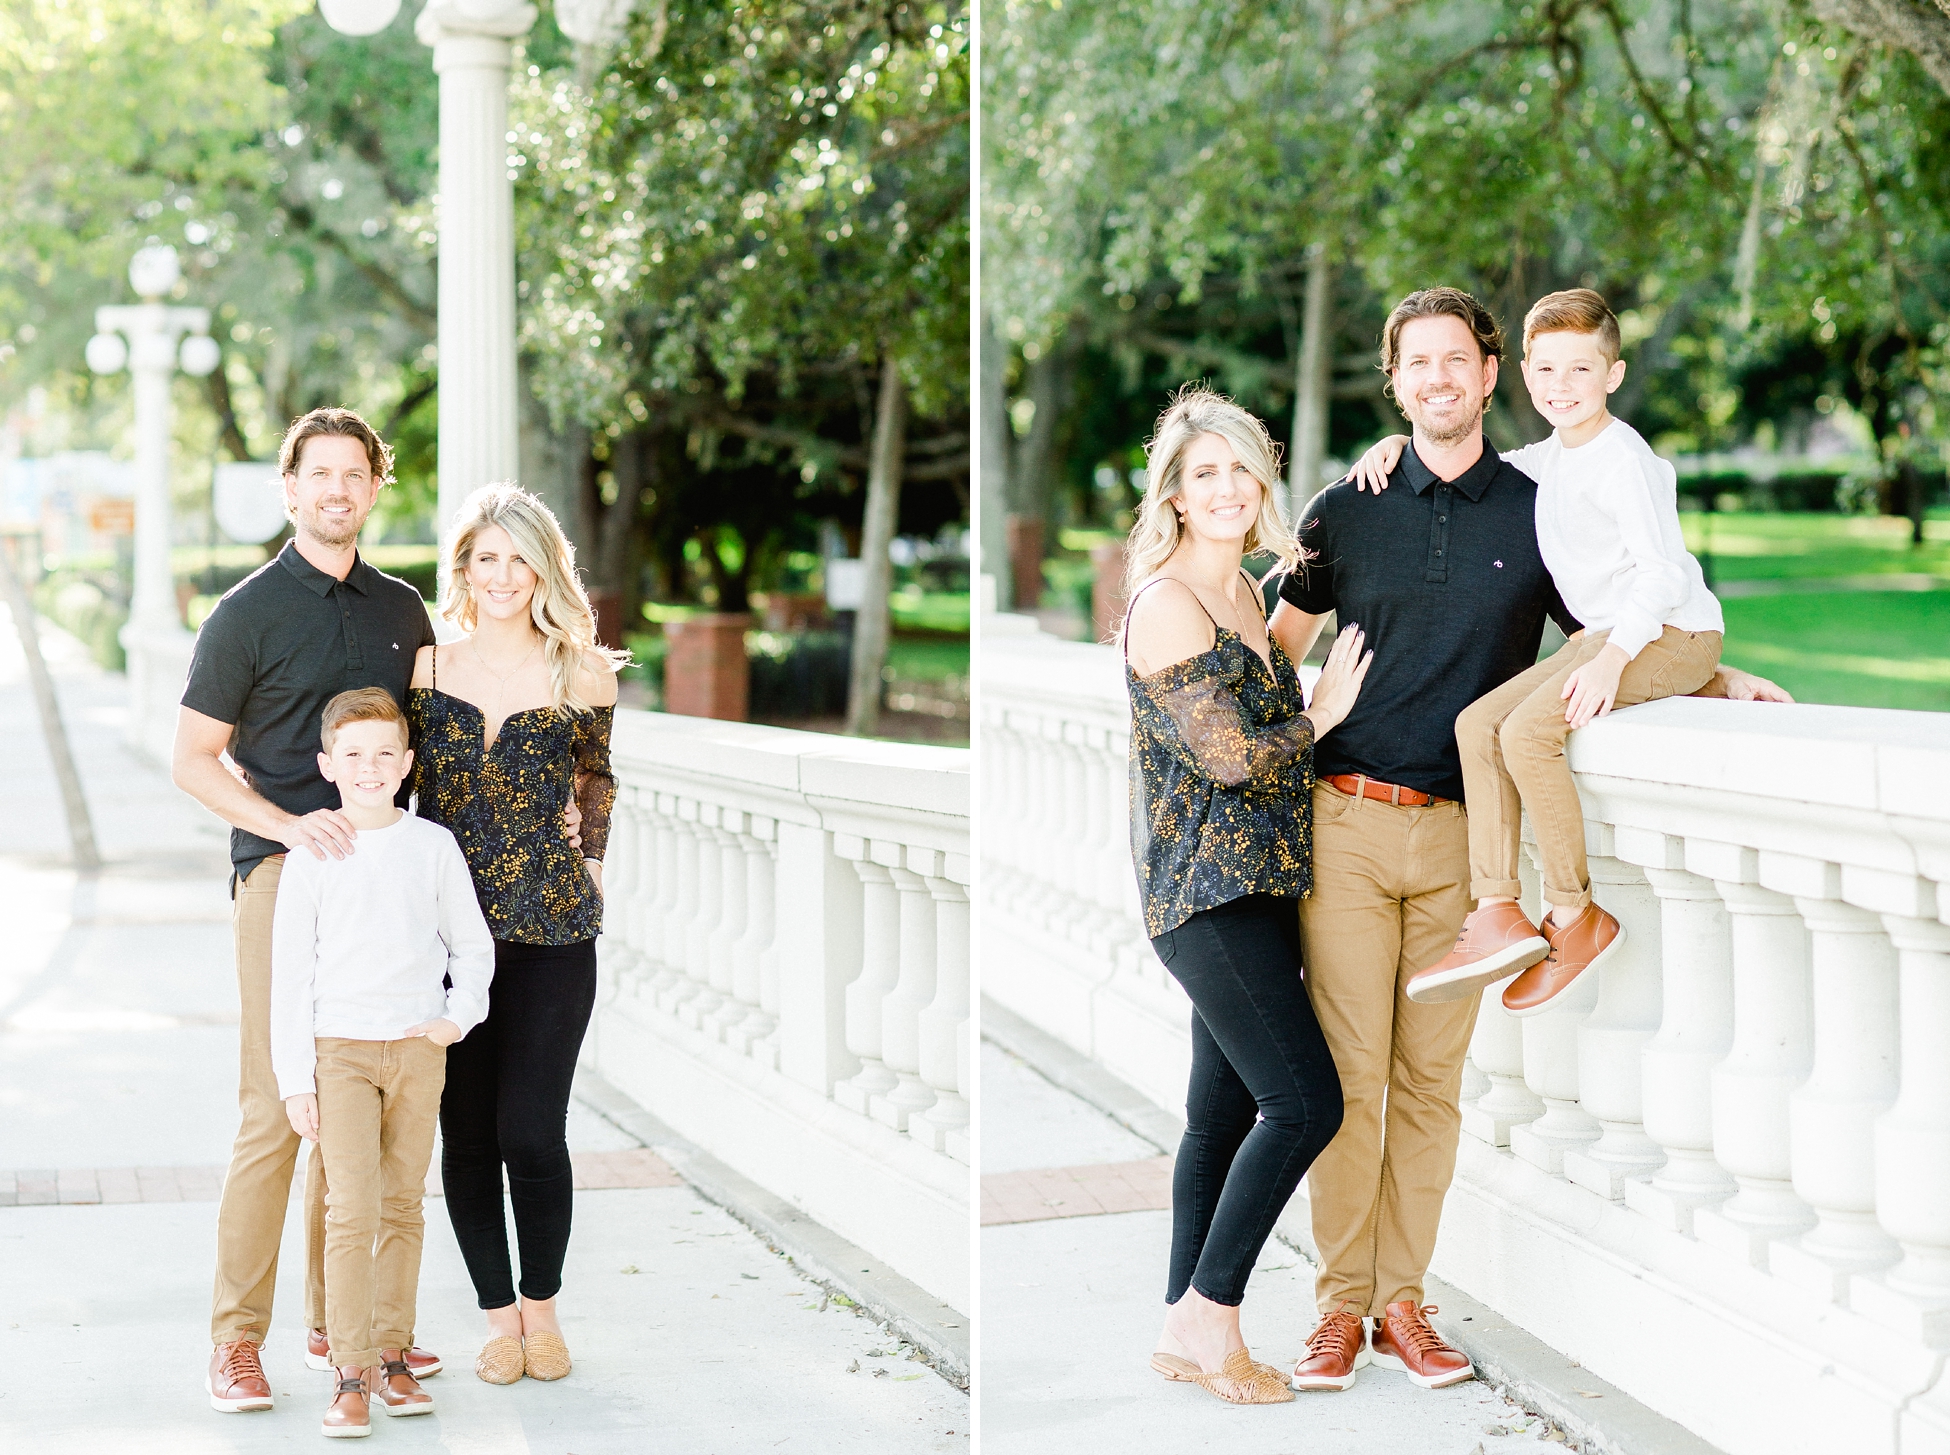 Tampa Family Photographer | © Ailyn La Torre Photography 2018